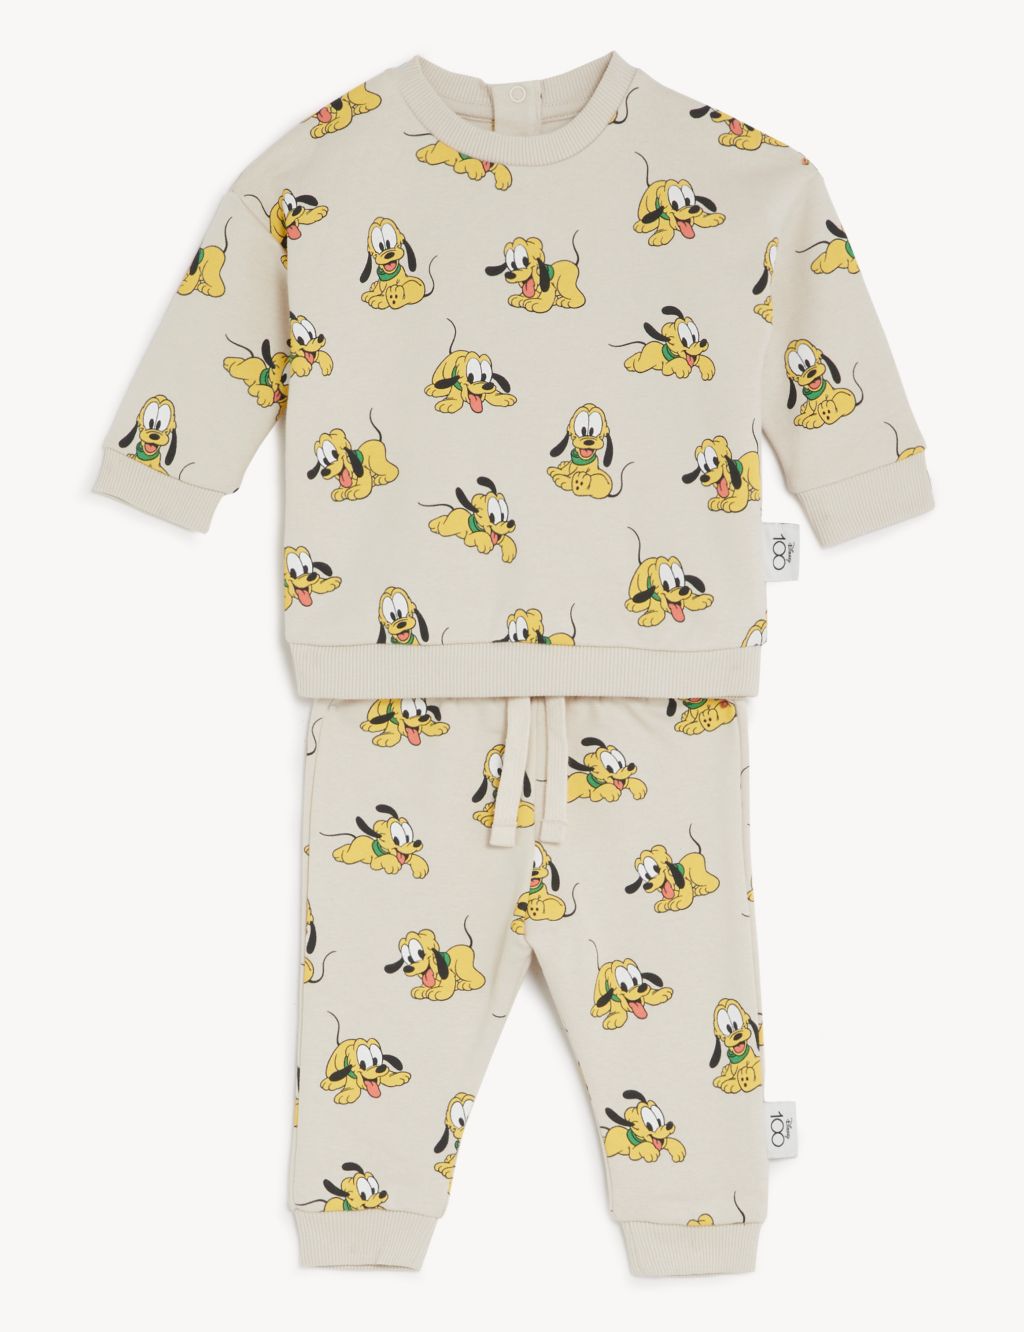 2pc Cotton Rich Pluto™ Outfit (0-3 Yrs) image 1